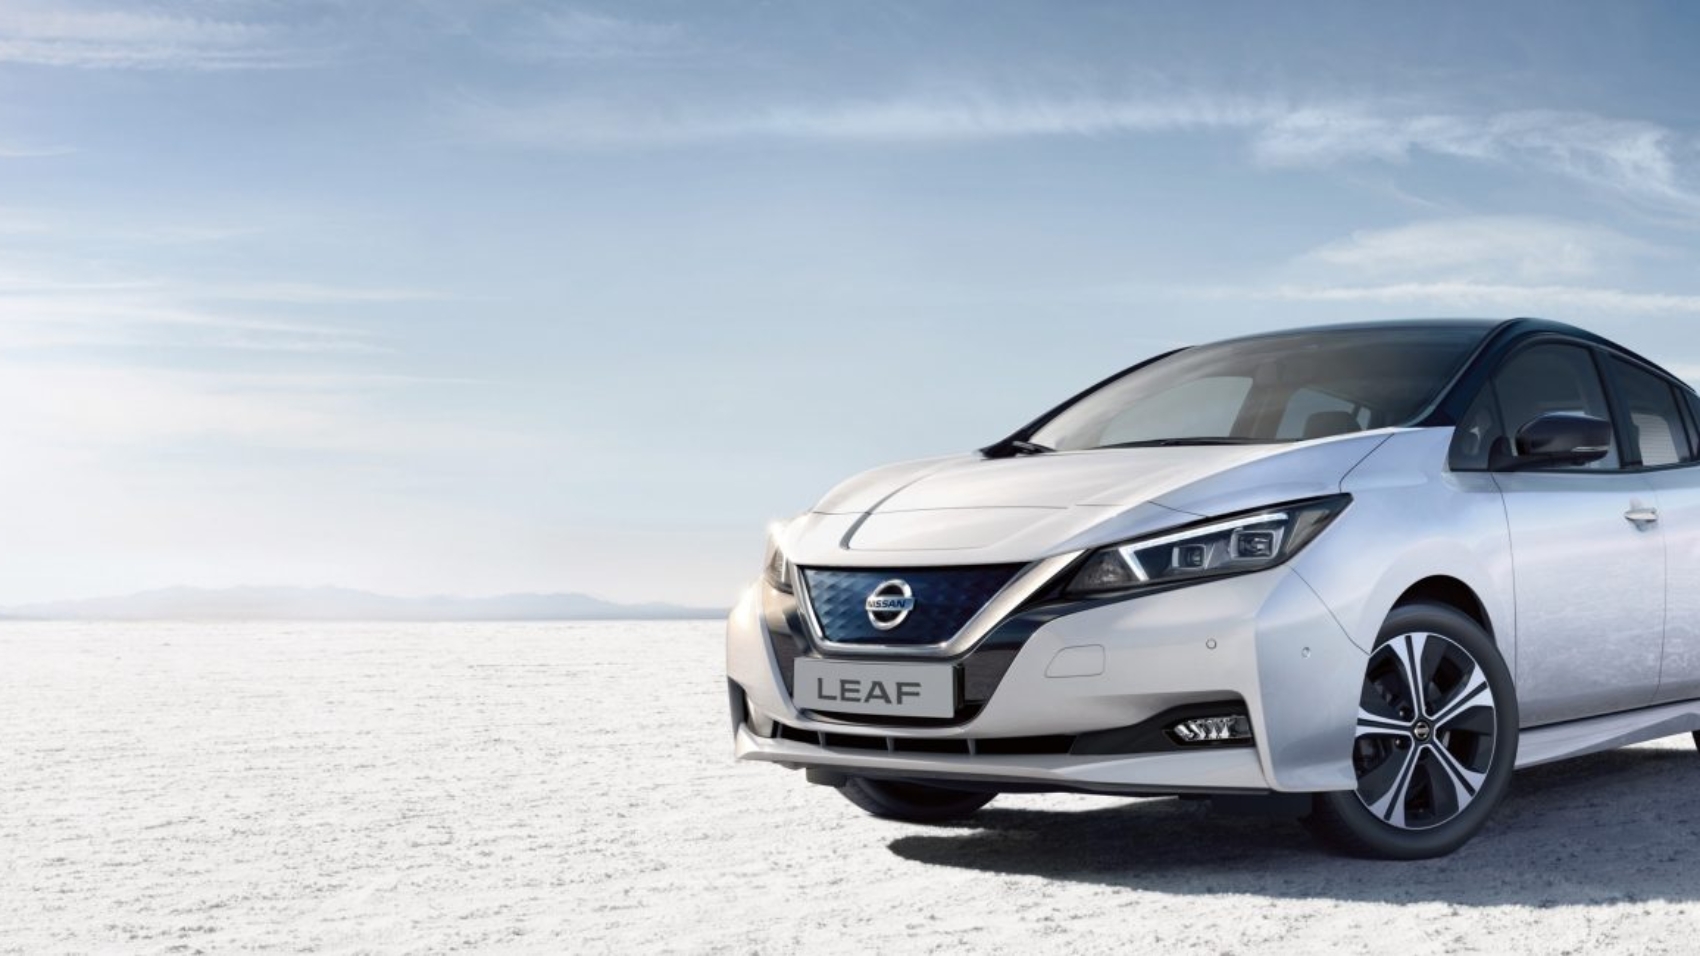 20-nissan-Leaf-hero-front-with-city-background-20tdieulhdpace101.jpg.ximg.l_full_m.smart